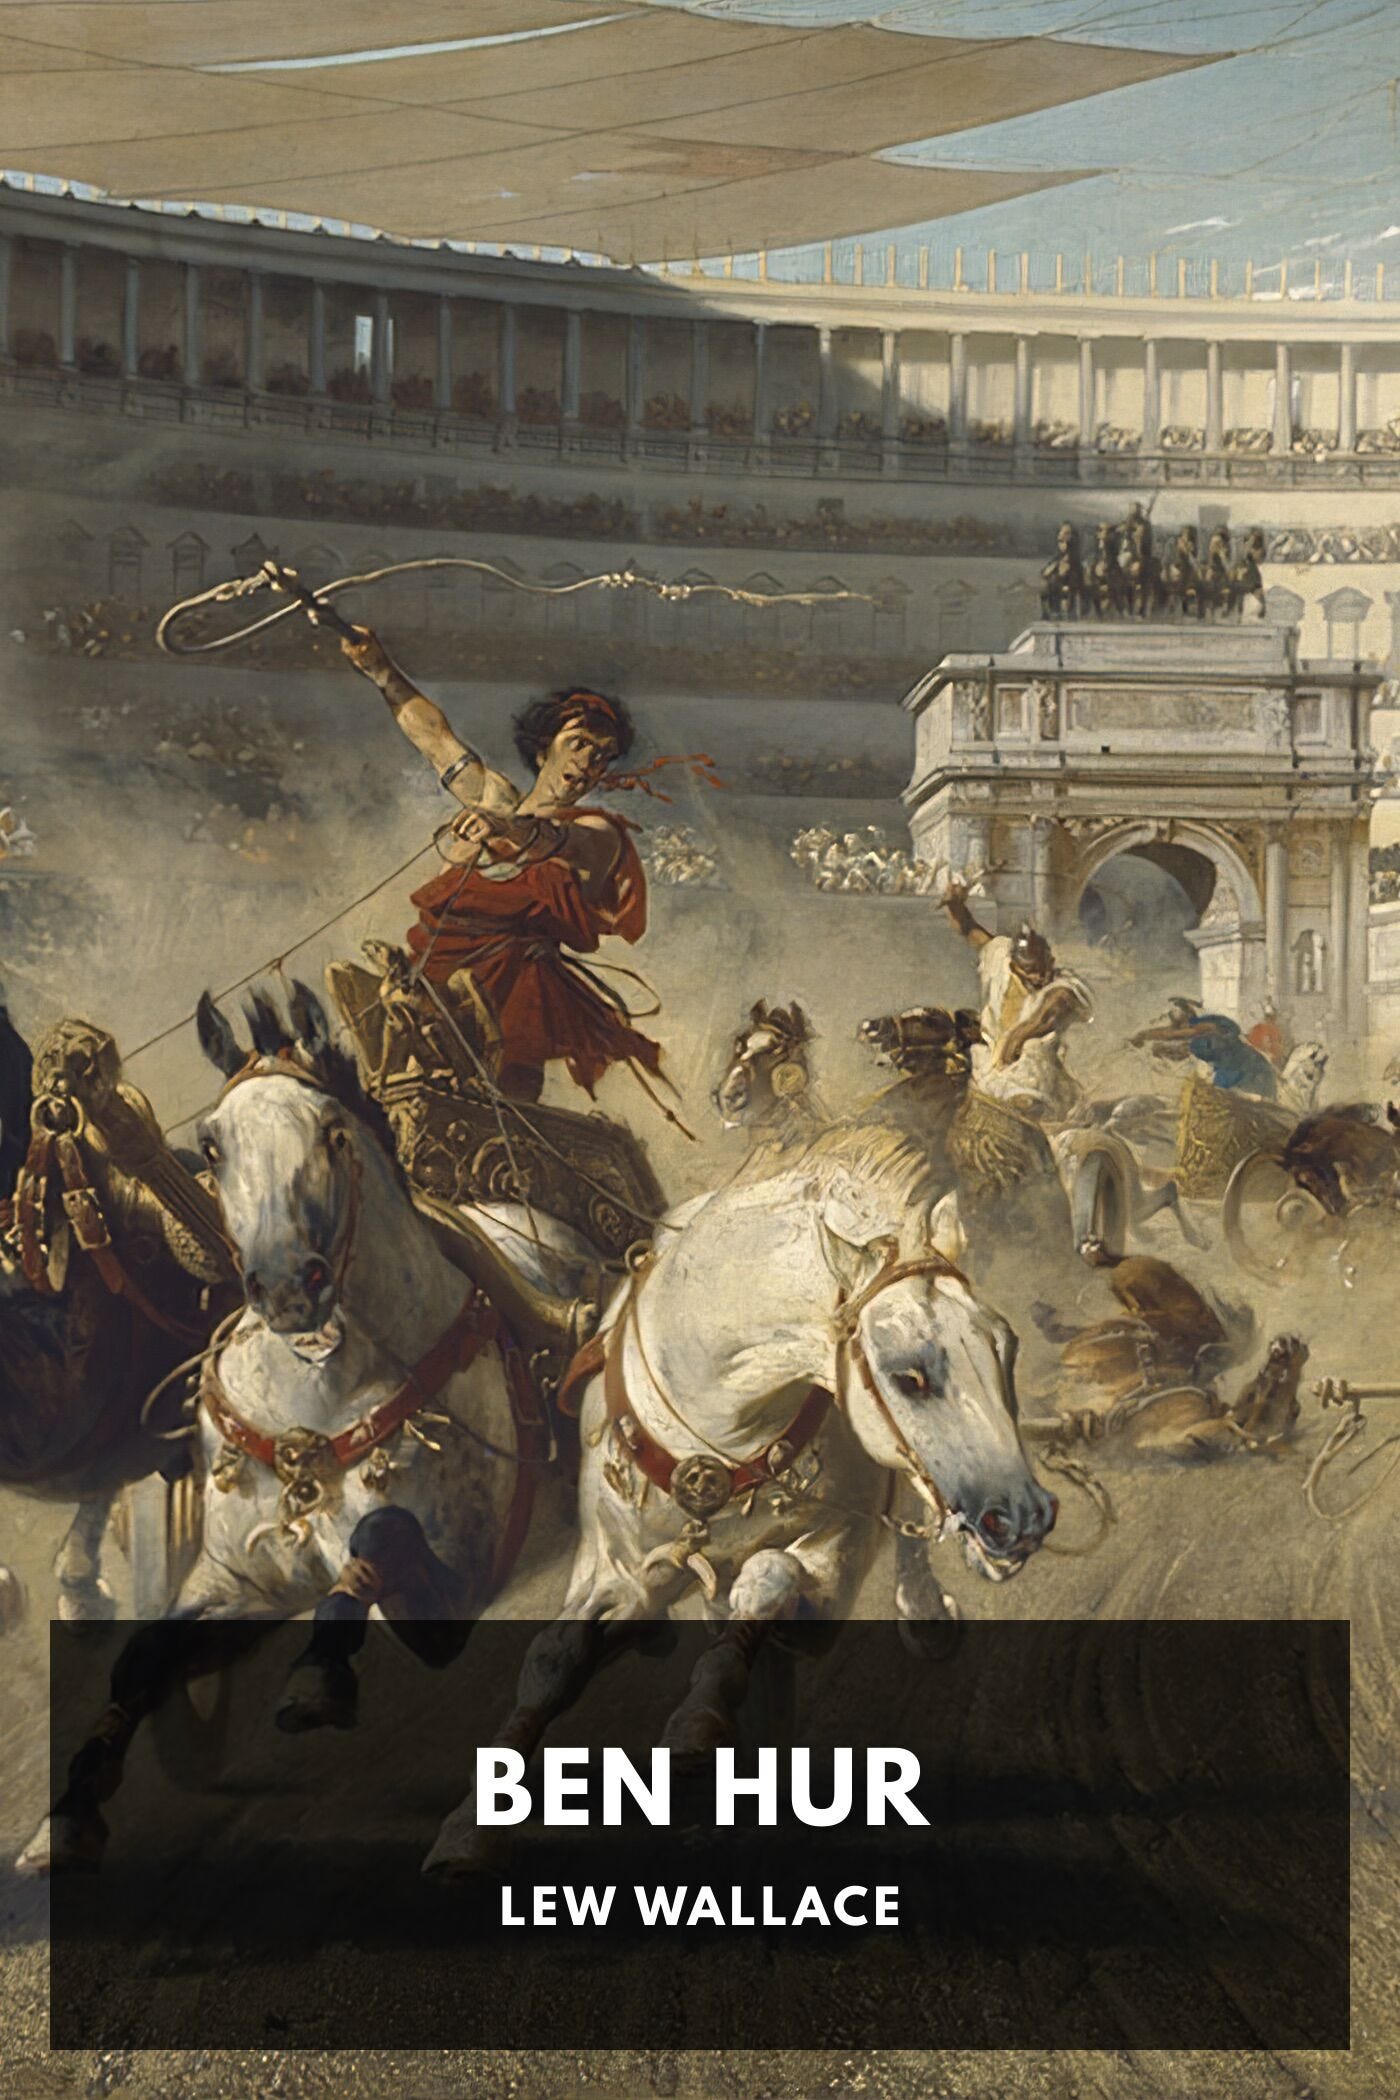 Ben Hur, by Lew Wallace - Free ebook download - Standard Ebooks: Free and  liberated ebooks, carefully produced for the true book lover.